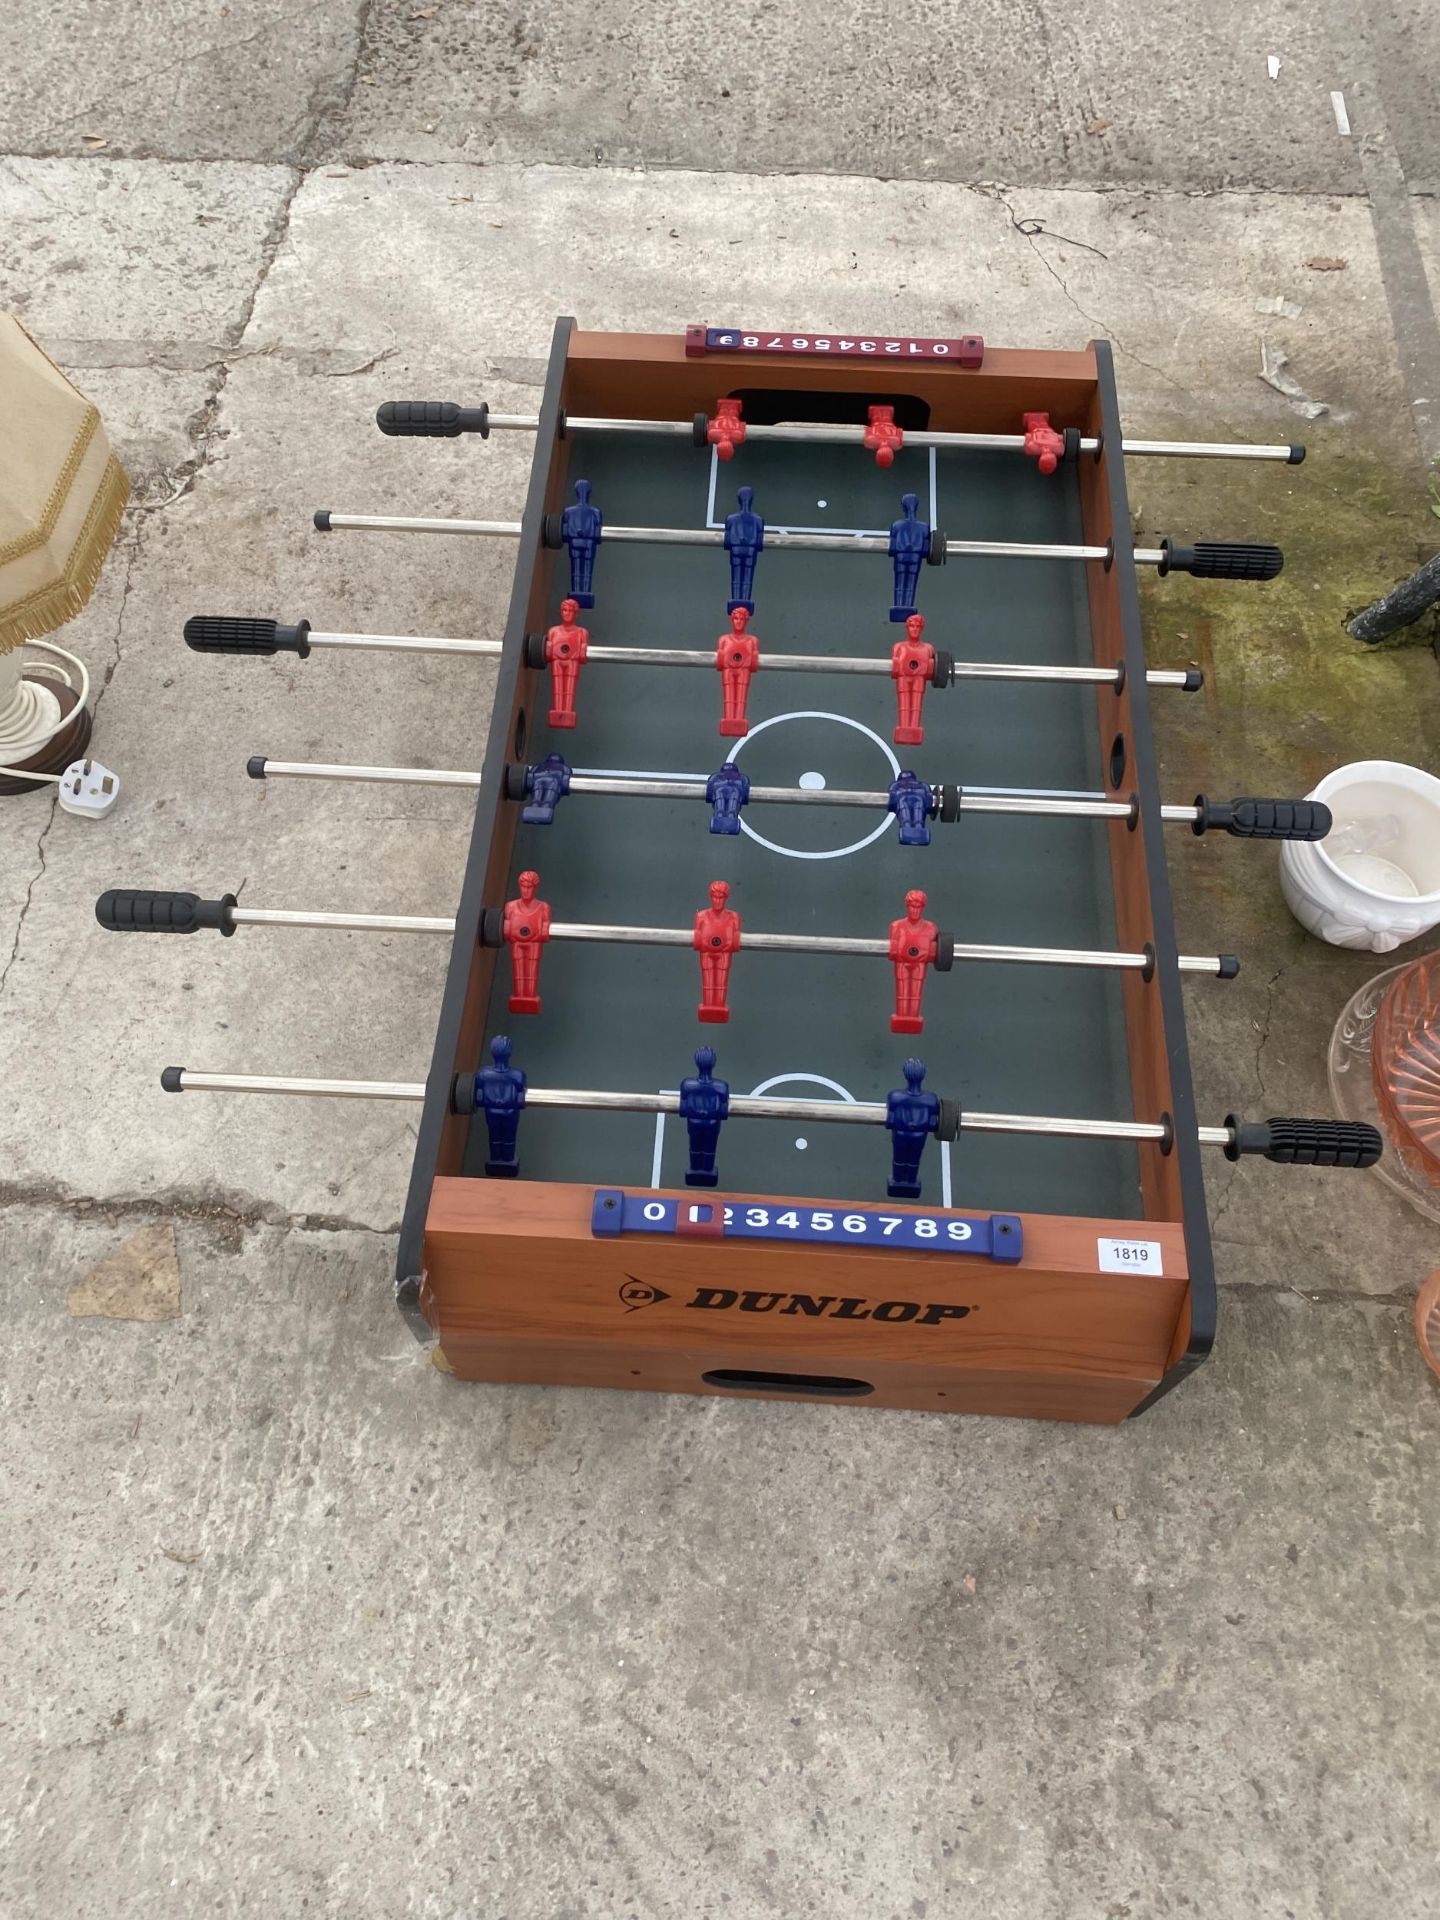 A TABLE TOP DUNLOP TABLE FOOTBALL GAME